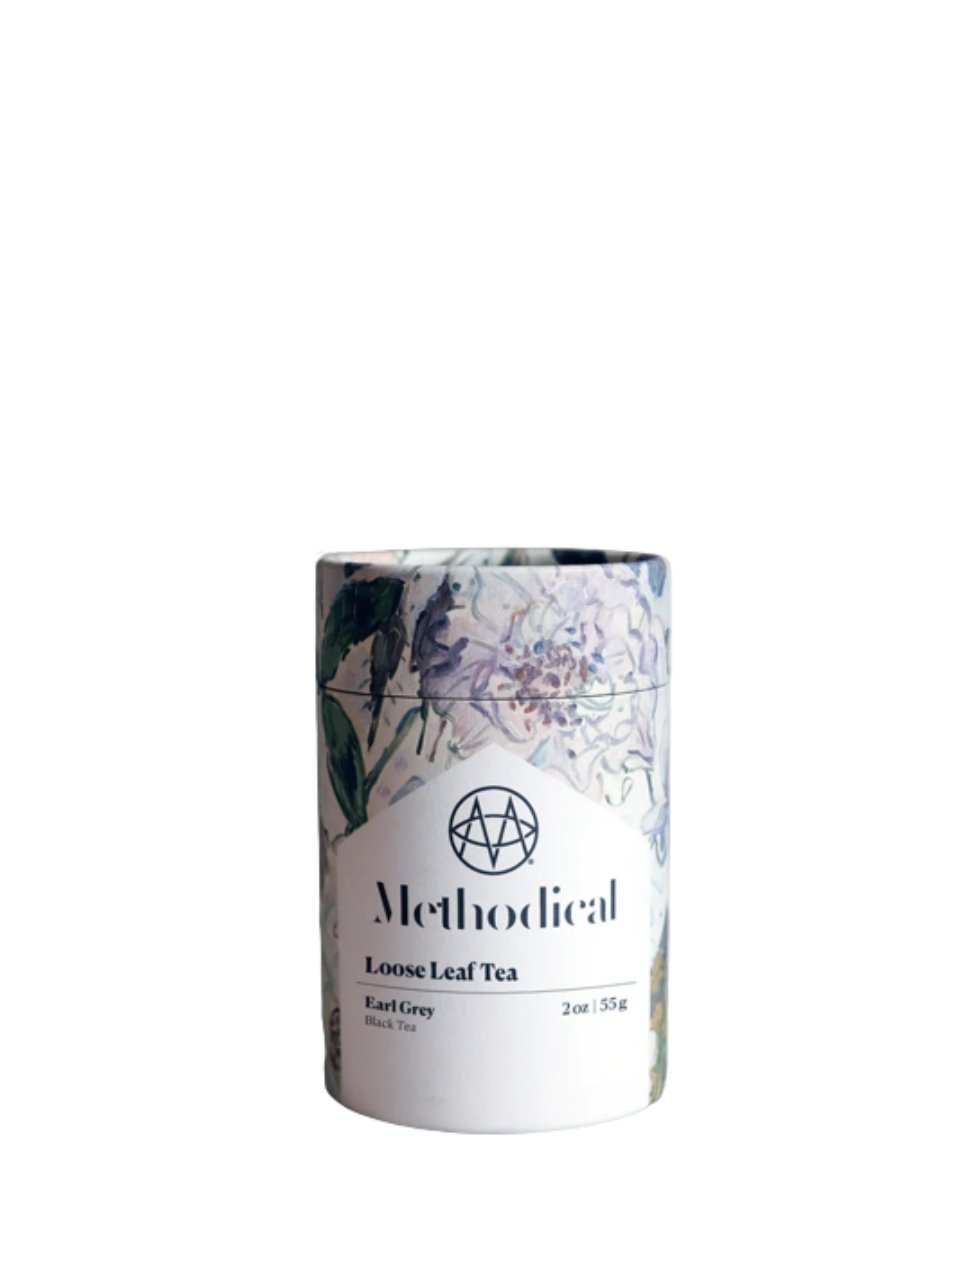 Methodical Loose Leaf Tea- Earl Grey | Exquisite Wine & Alcohol Gift Delivery Toronto Canada | Vyno